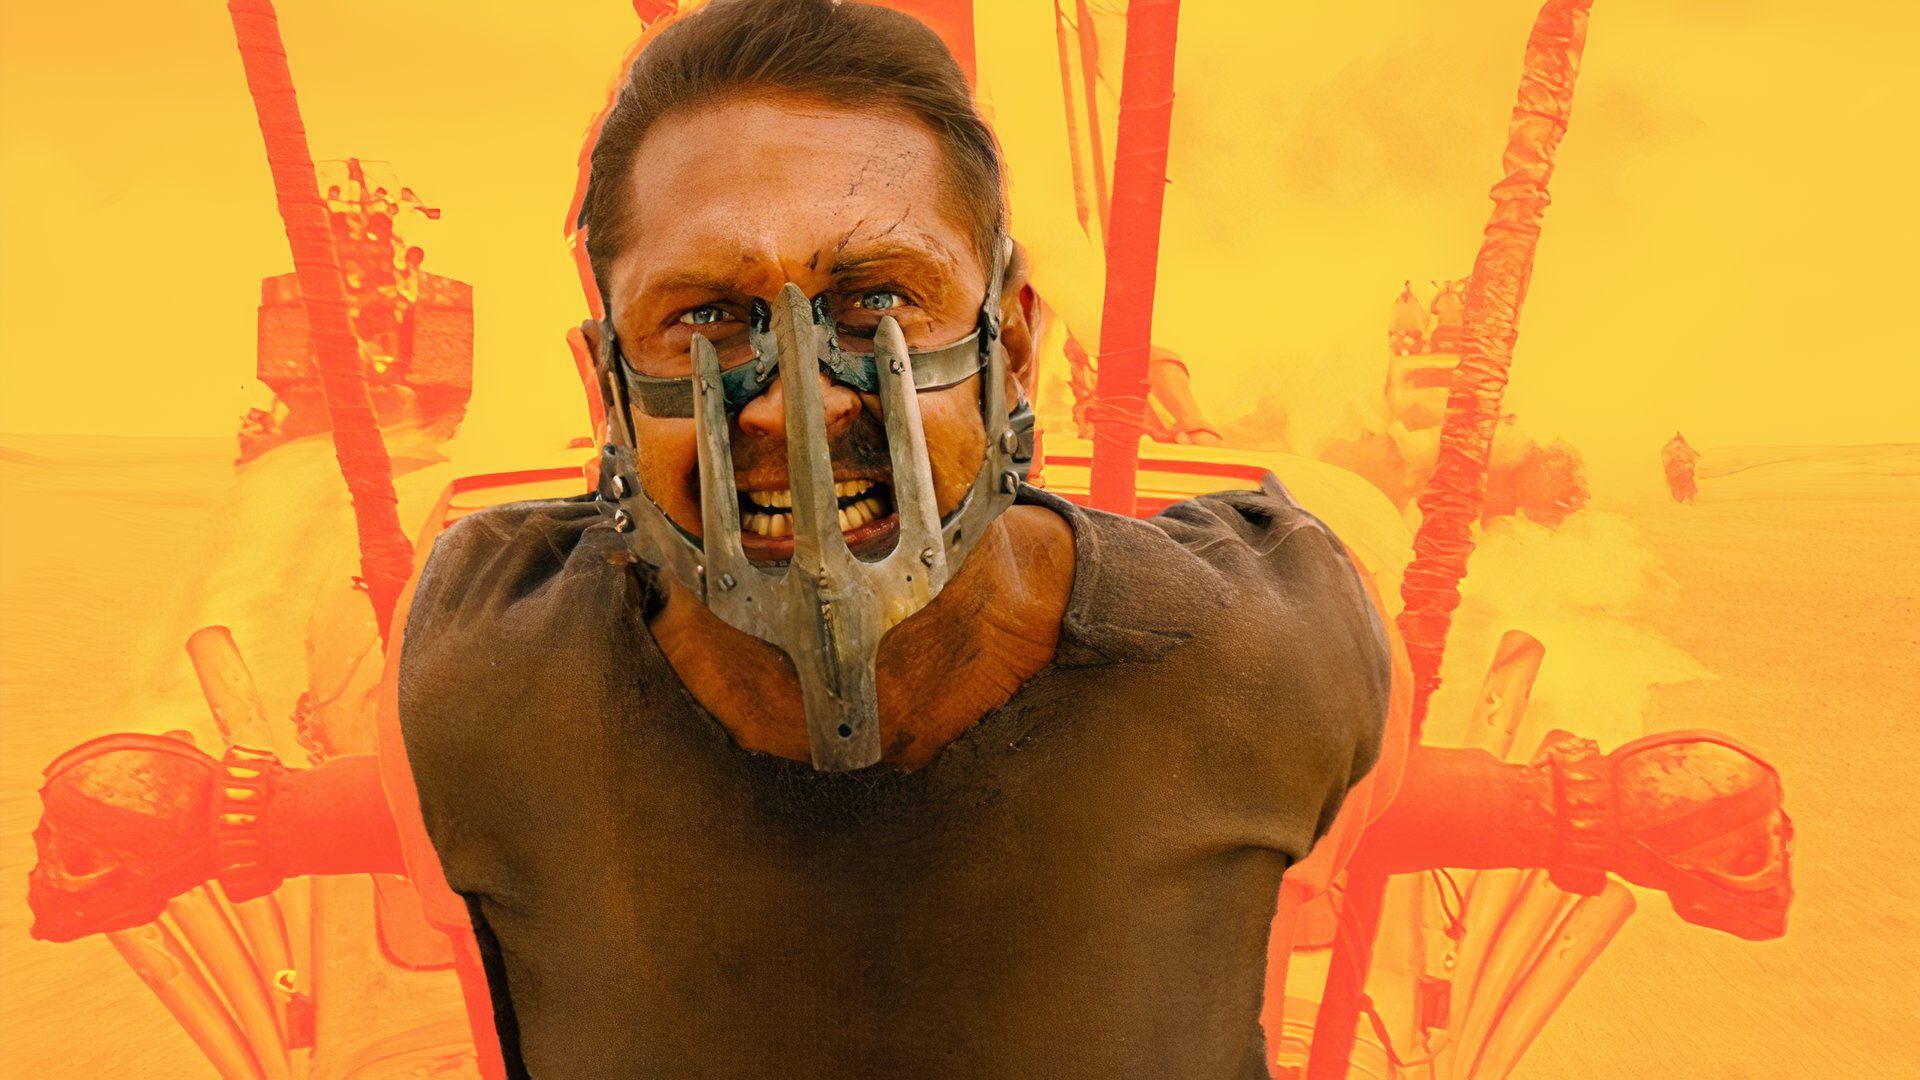 Furiosa Director Further Teases Fury Road Prequel Following Mad Max in the Wasteland